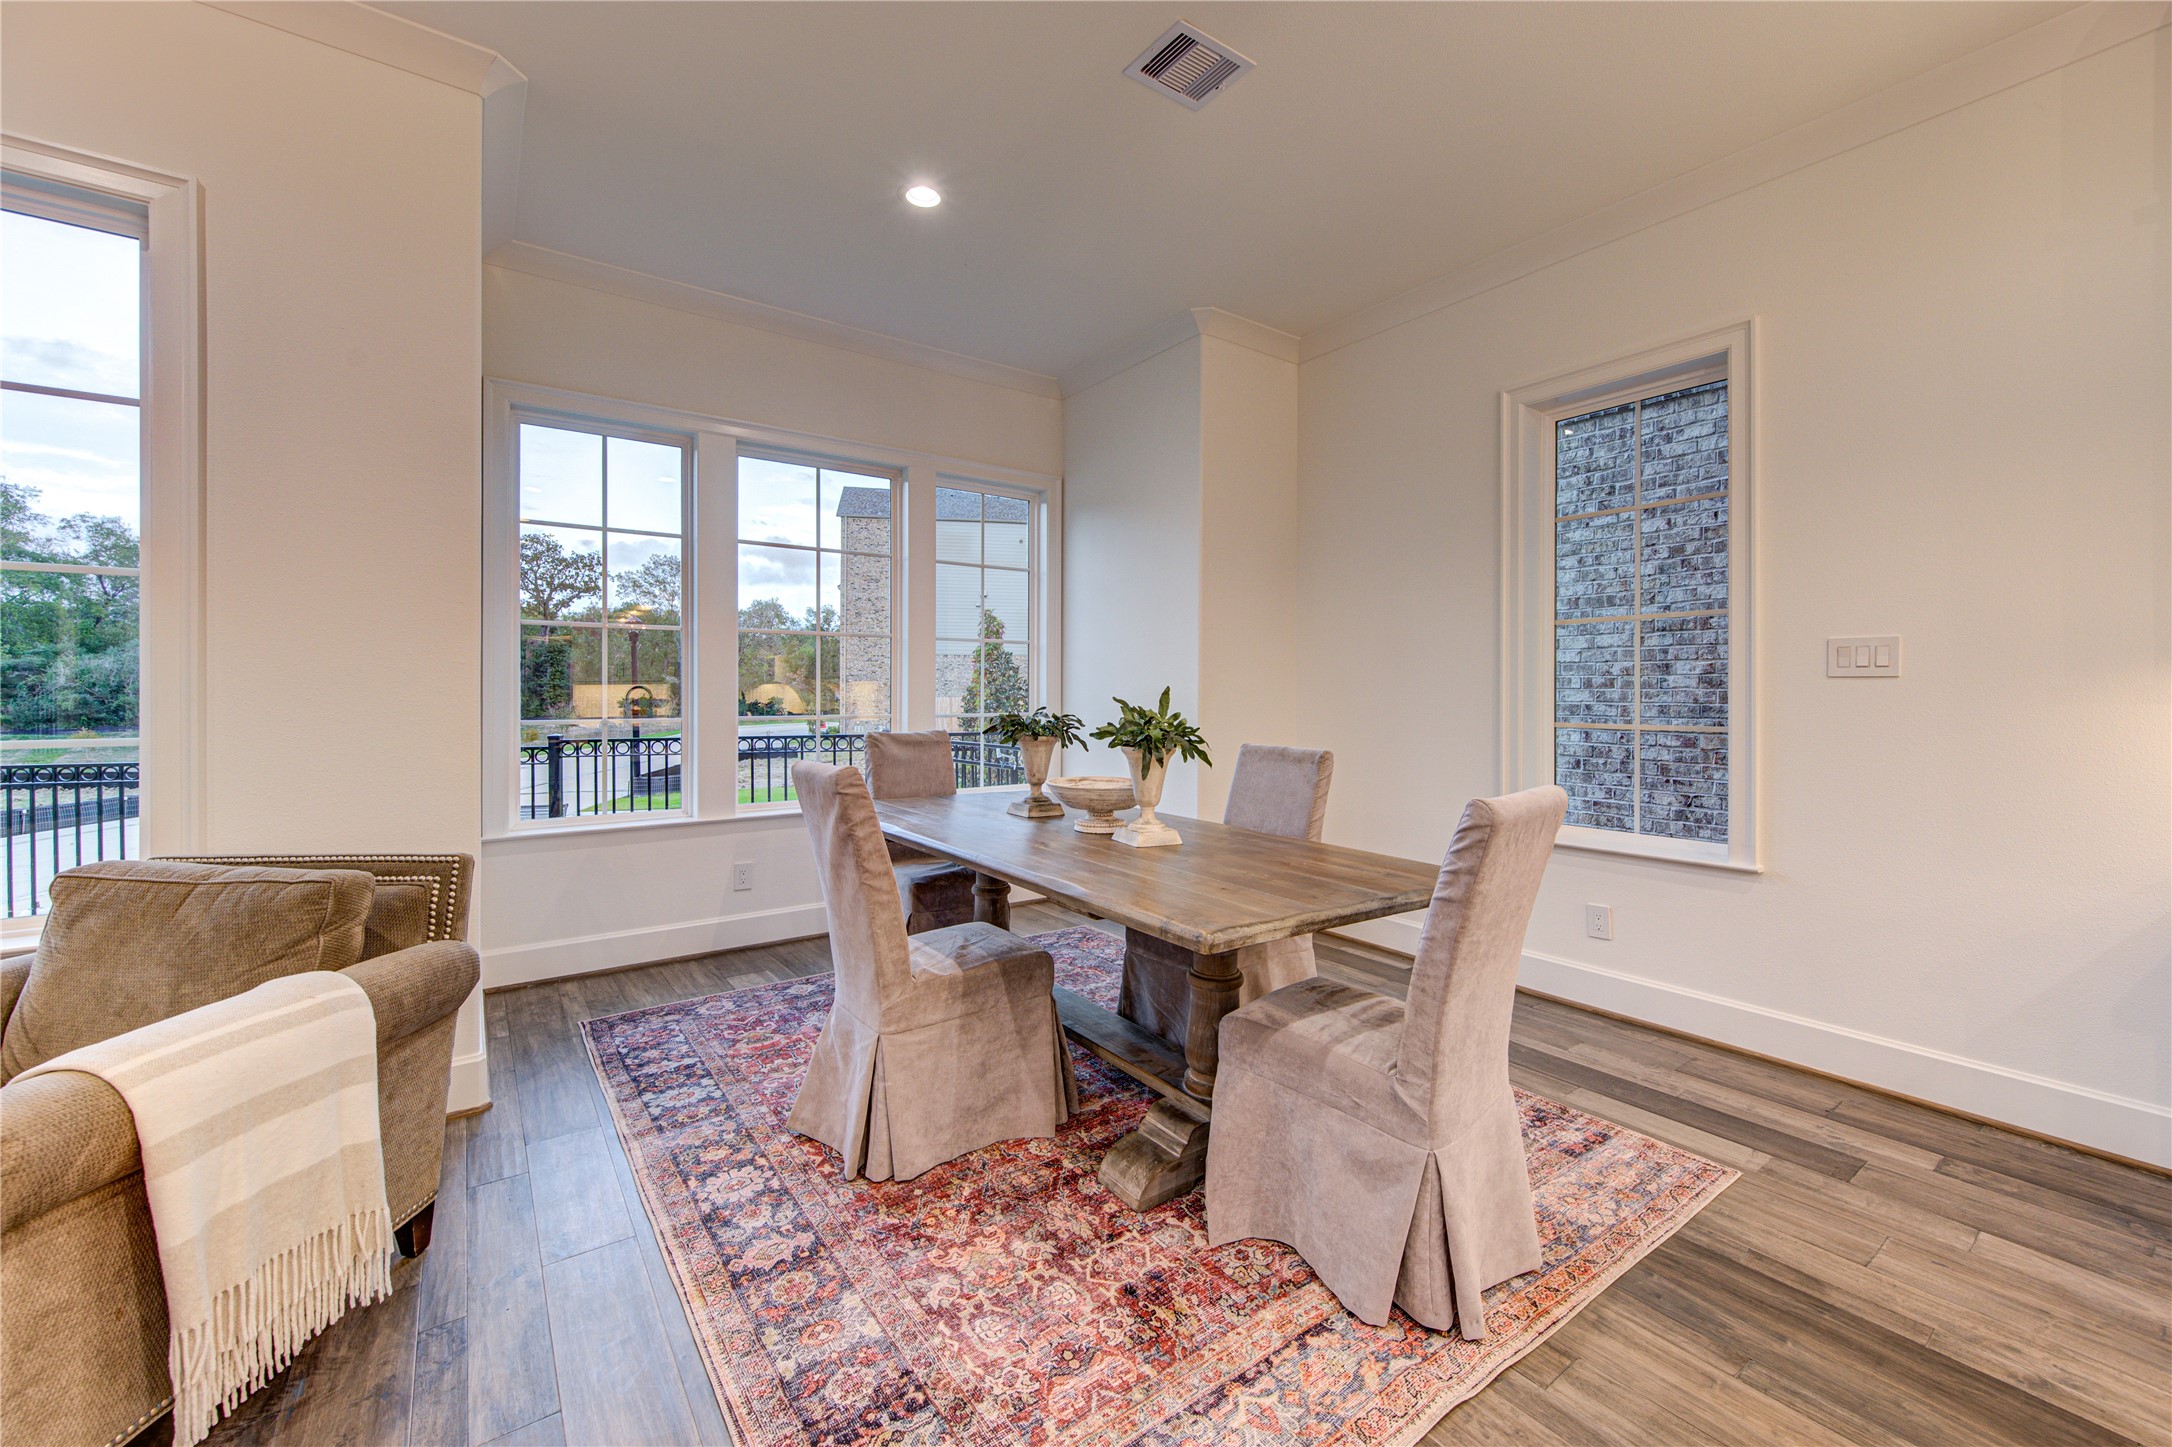 The formal dining room is conveniently located off the living room and kitchen in this modern open floorplan.